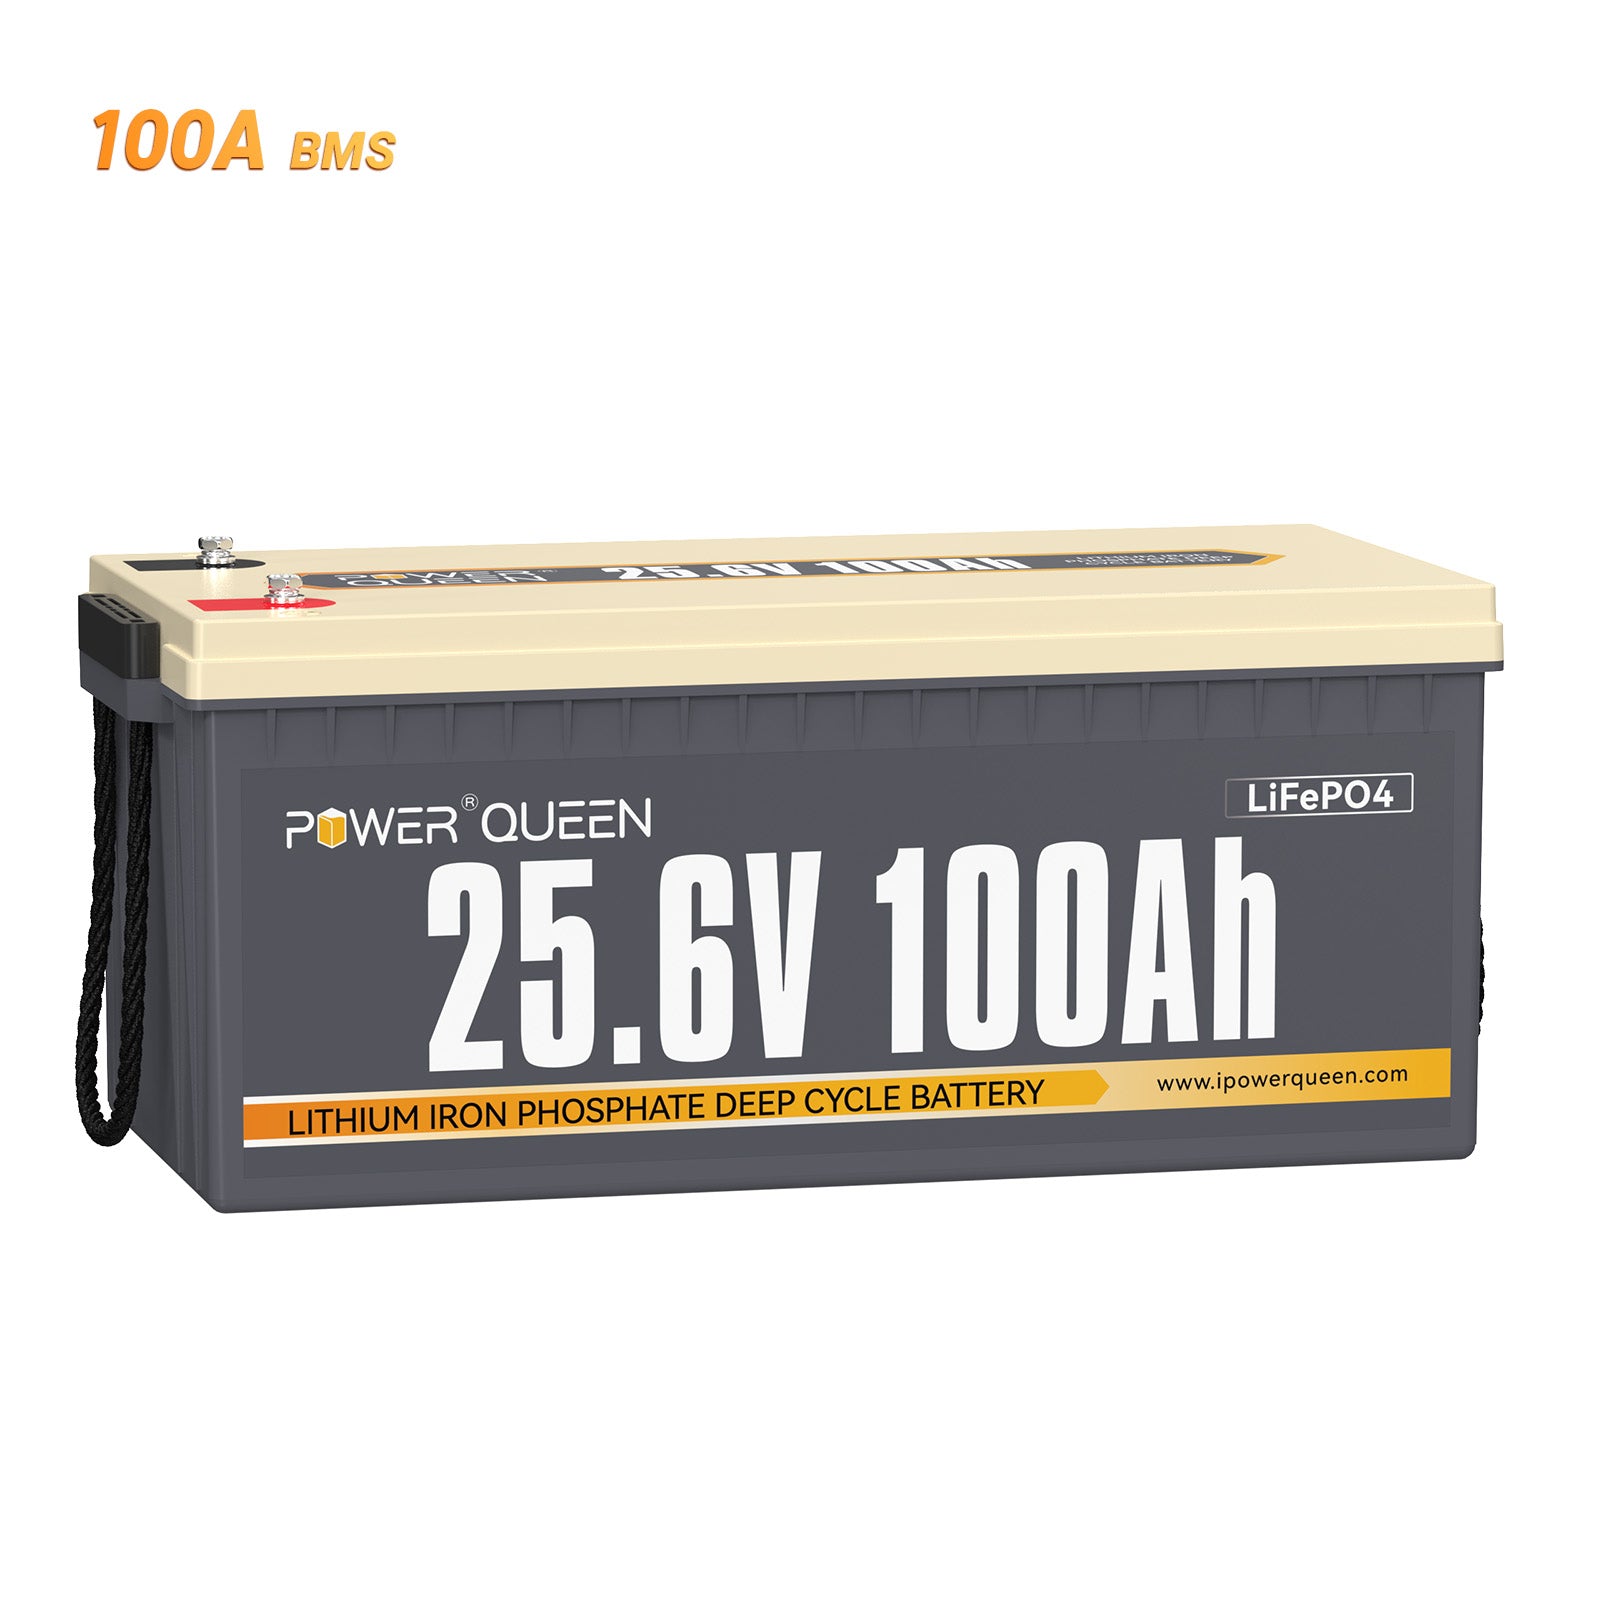 Power Queen 25.6V 100Ah LiFePO4 battery, built-in 100A BMS